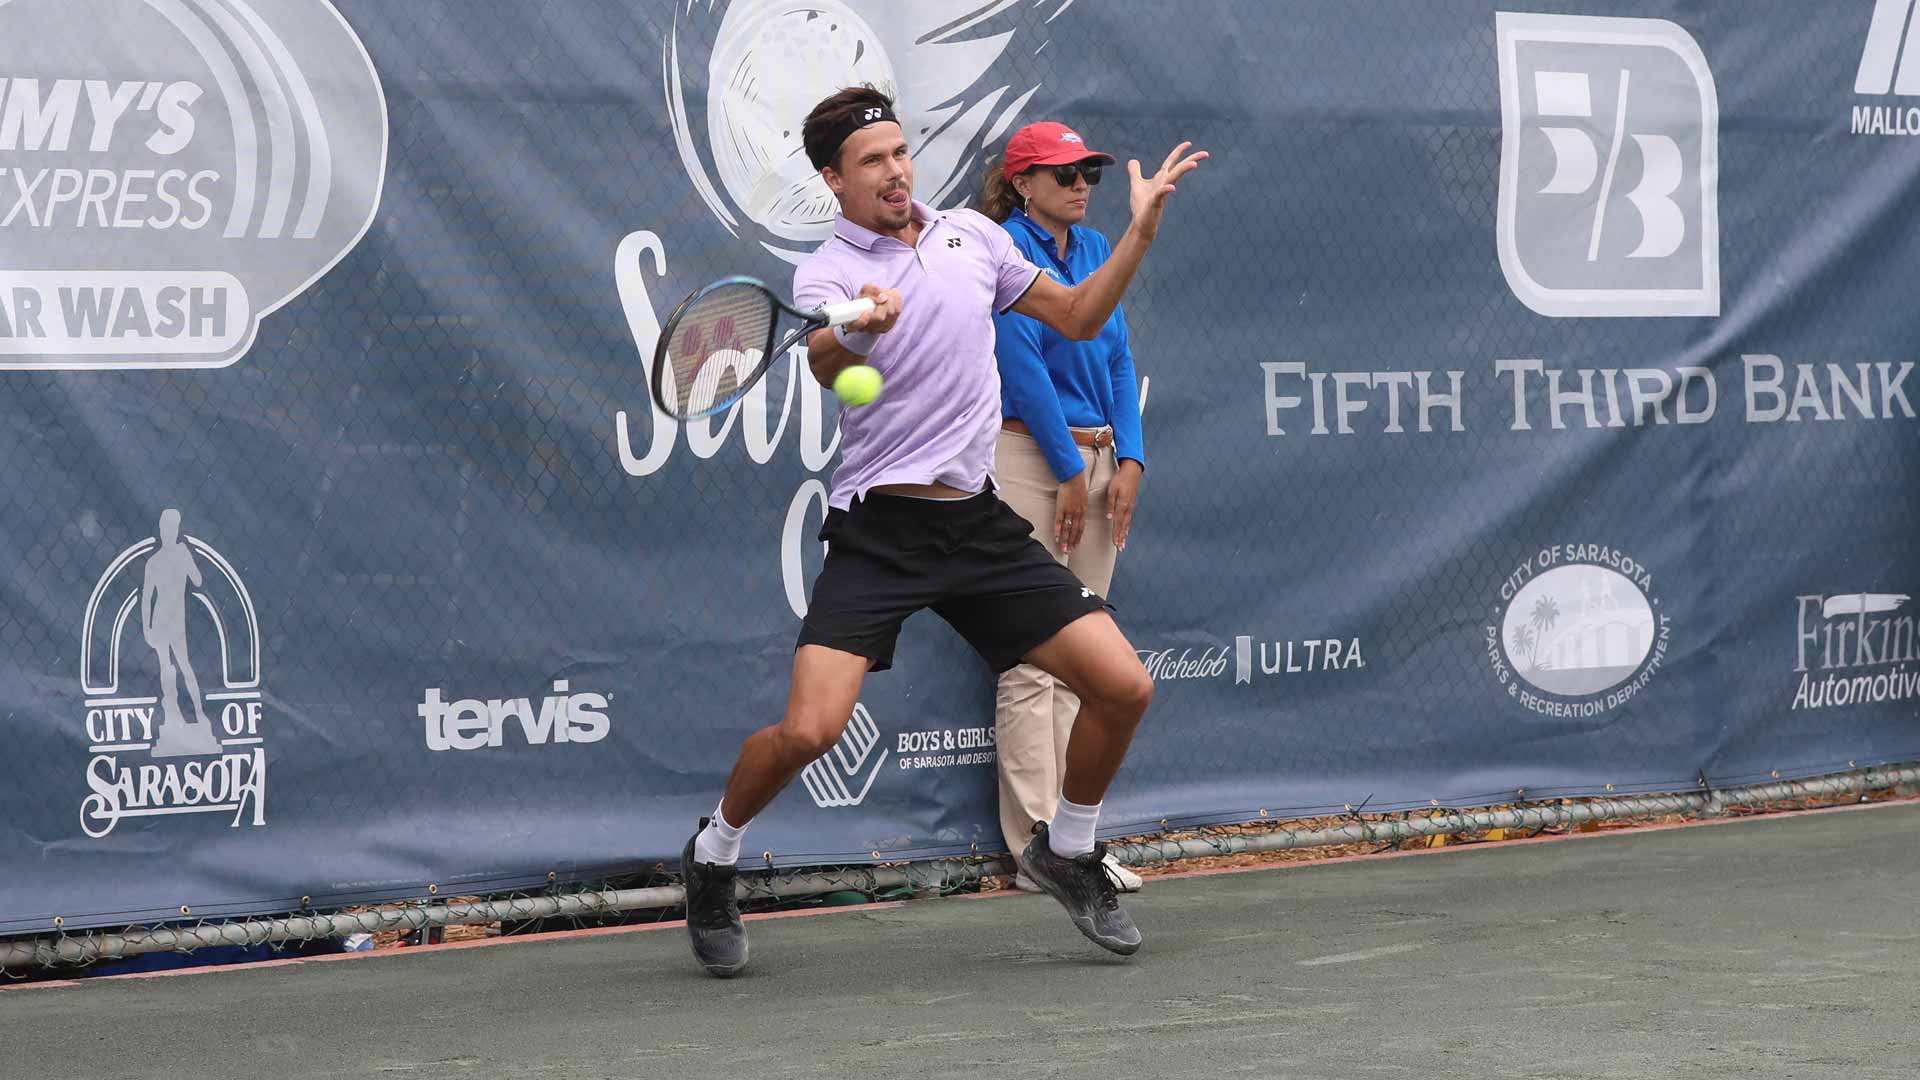 Daniel Altmaier in action at the Sarasota Challenger.